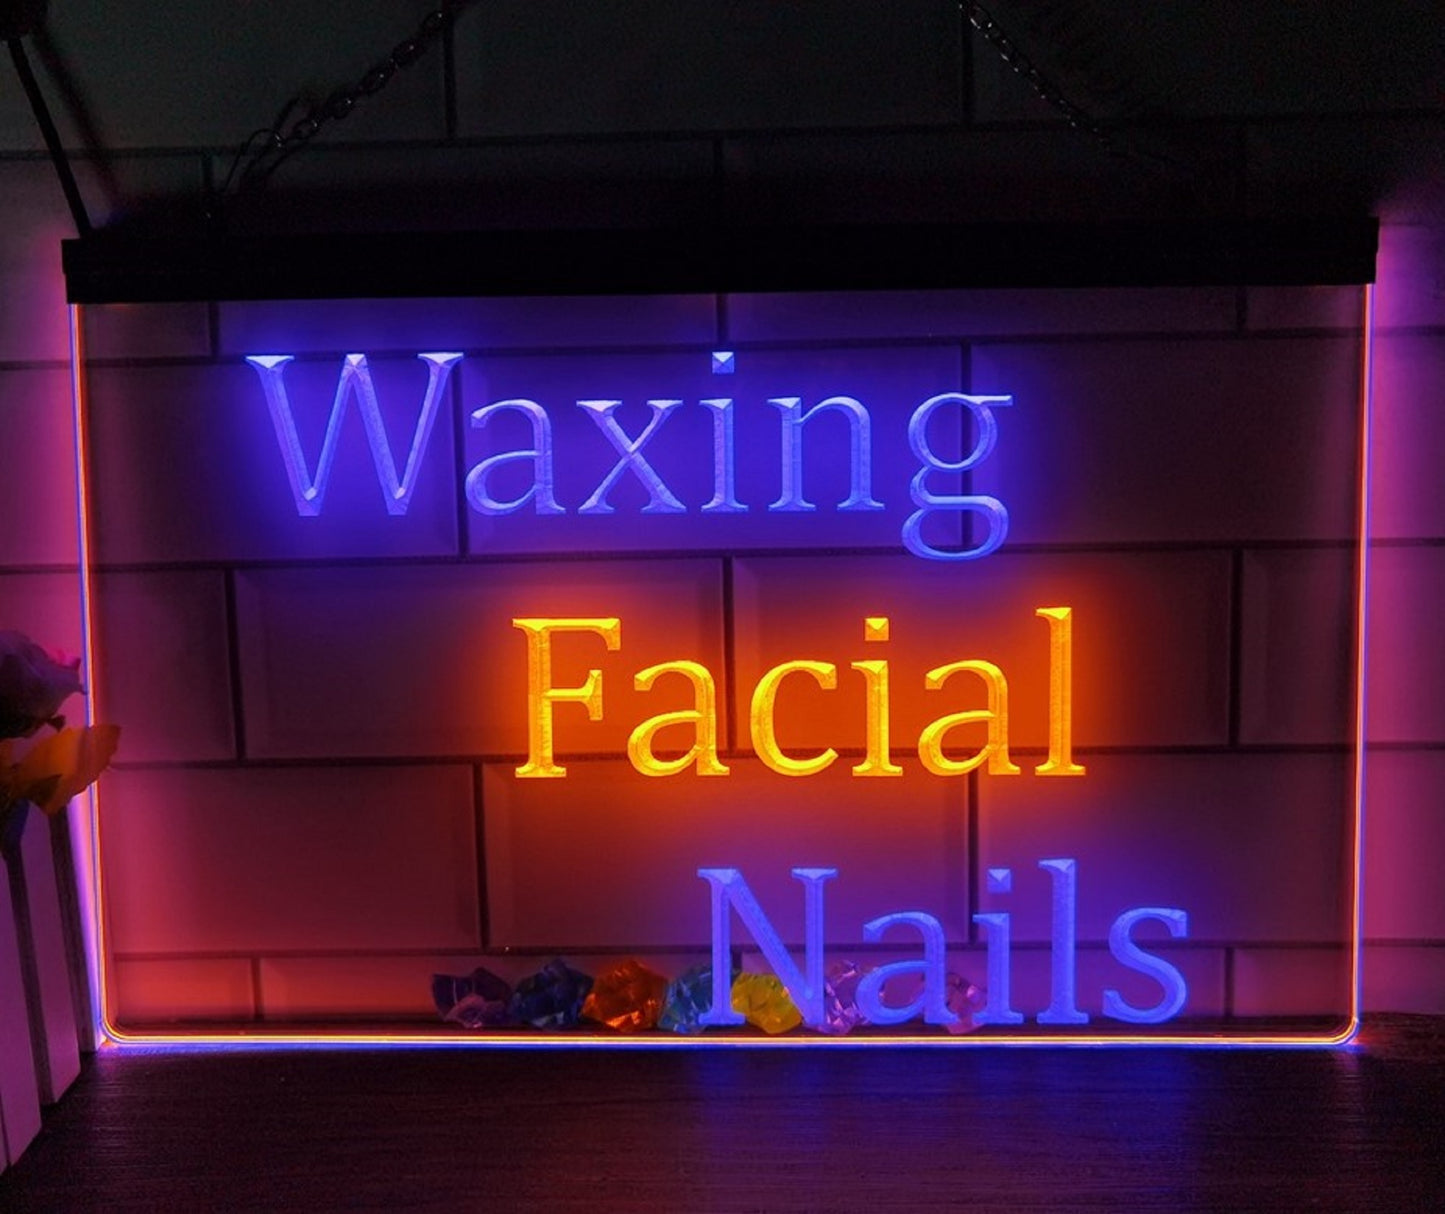 Waxing Facial Nails Neon Sign Dual Color Spa Beauty Shop Decor On/OFF Switch Many Colors Free Shipping